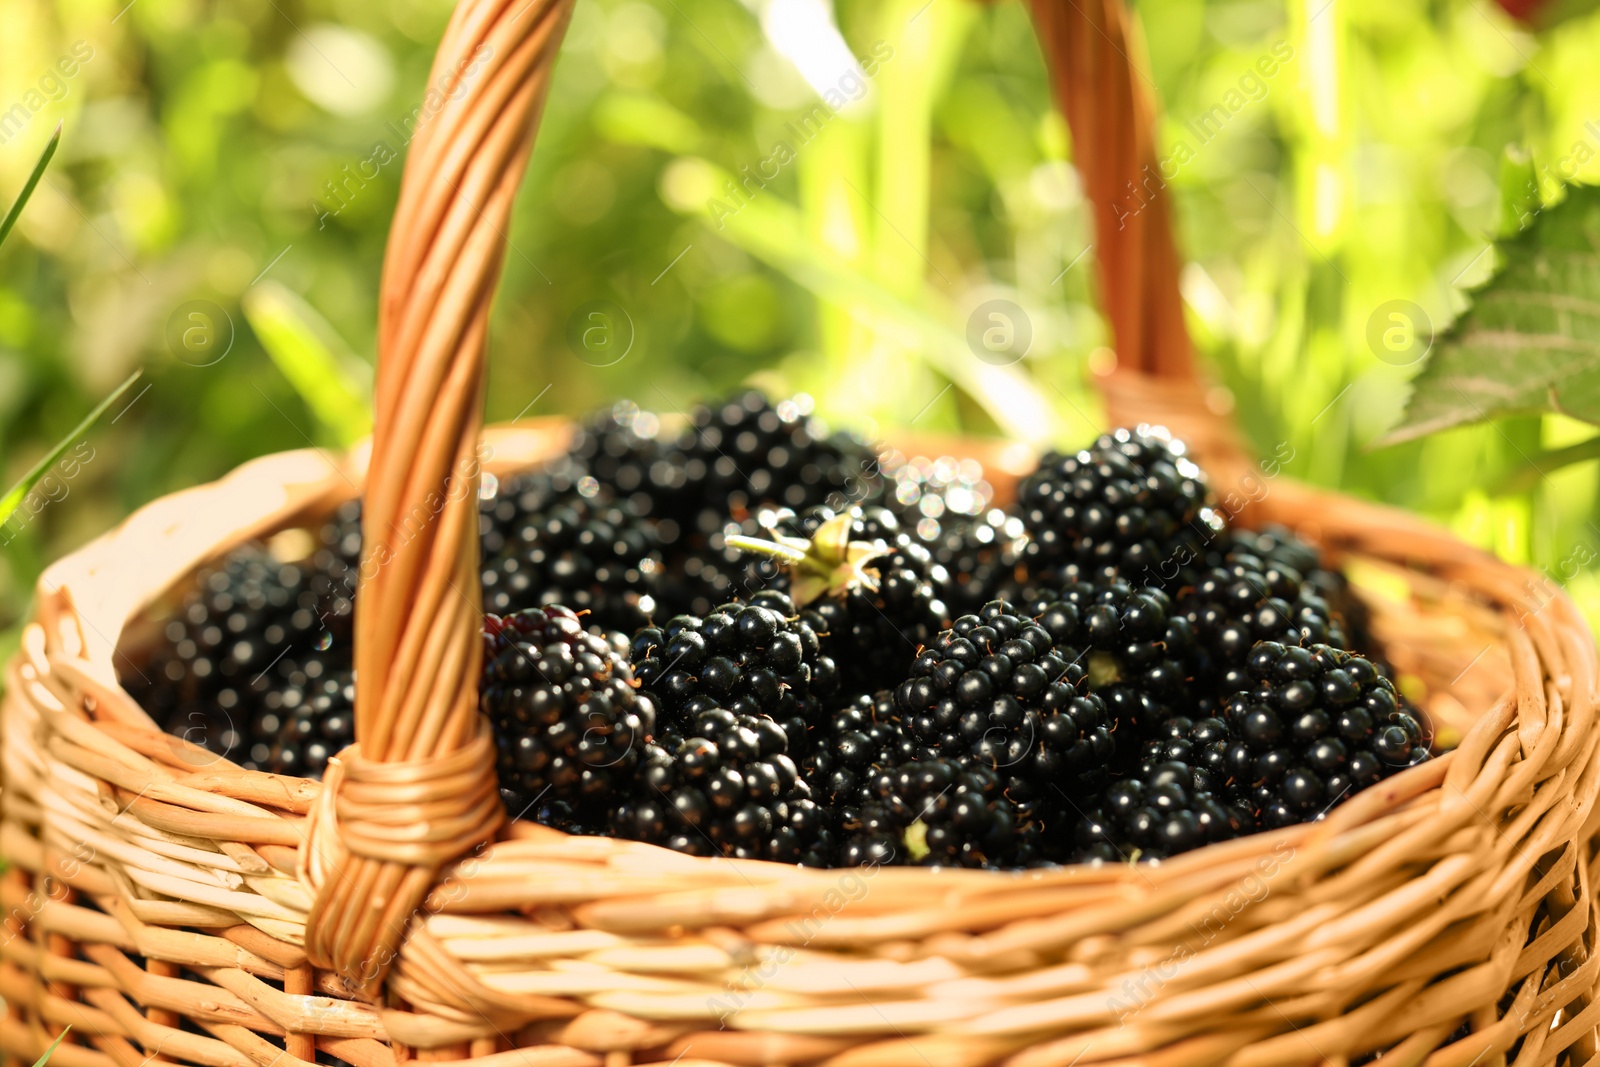 Photo of Wicker basket with ripe blackberries outdoors, closeup